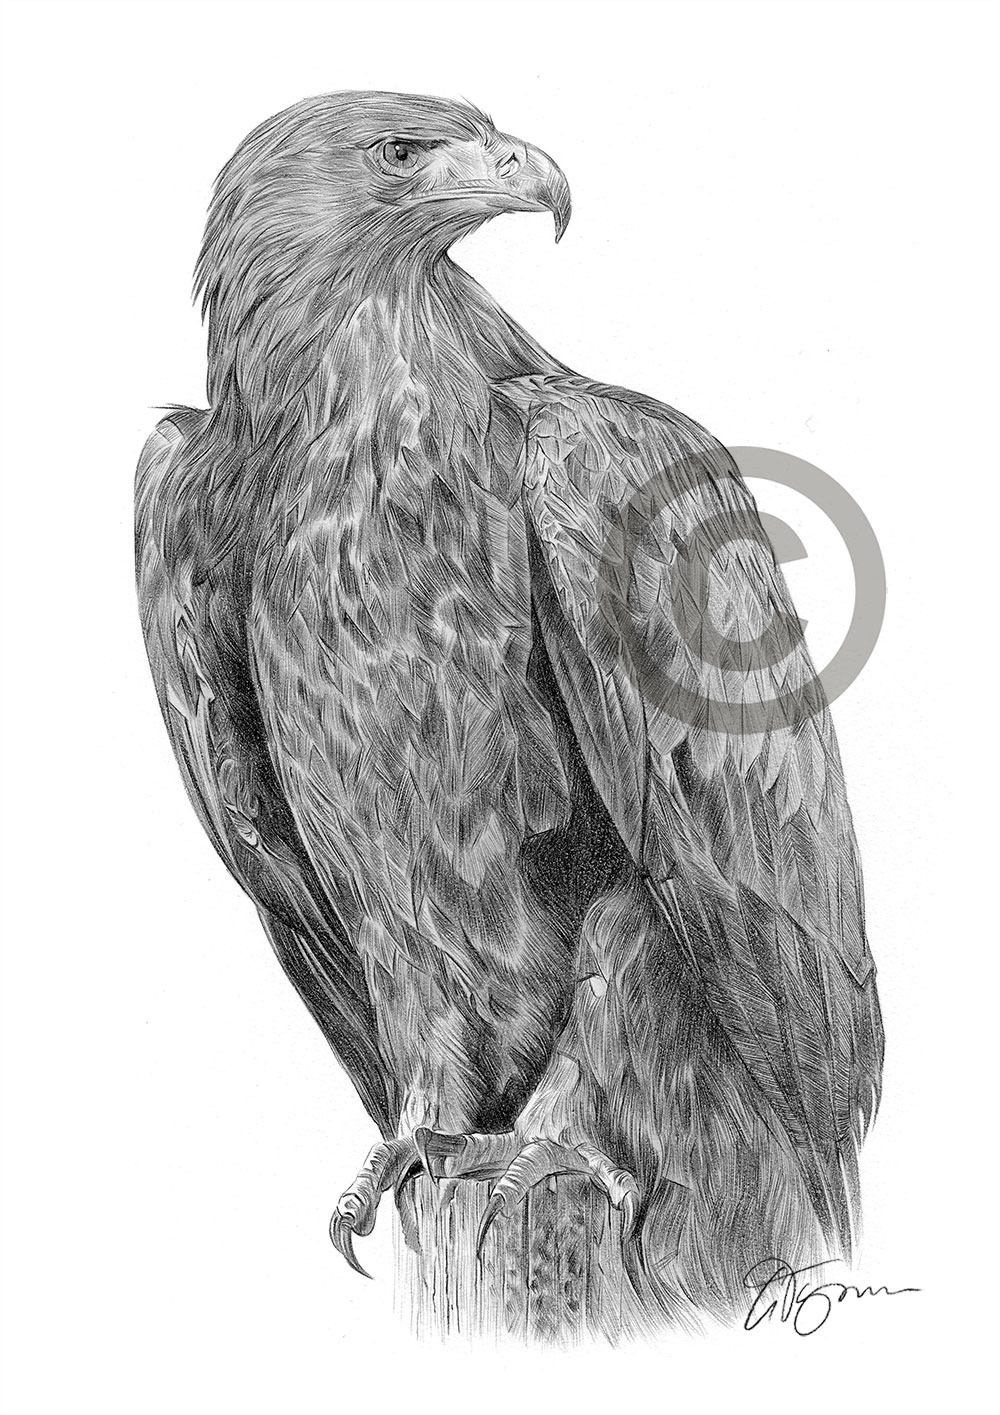 Black and white eagle pencil drawing